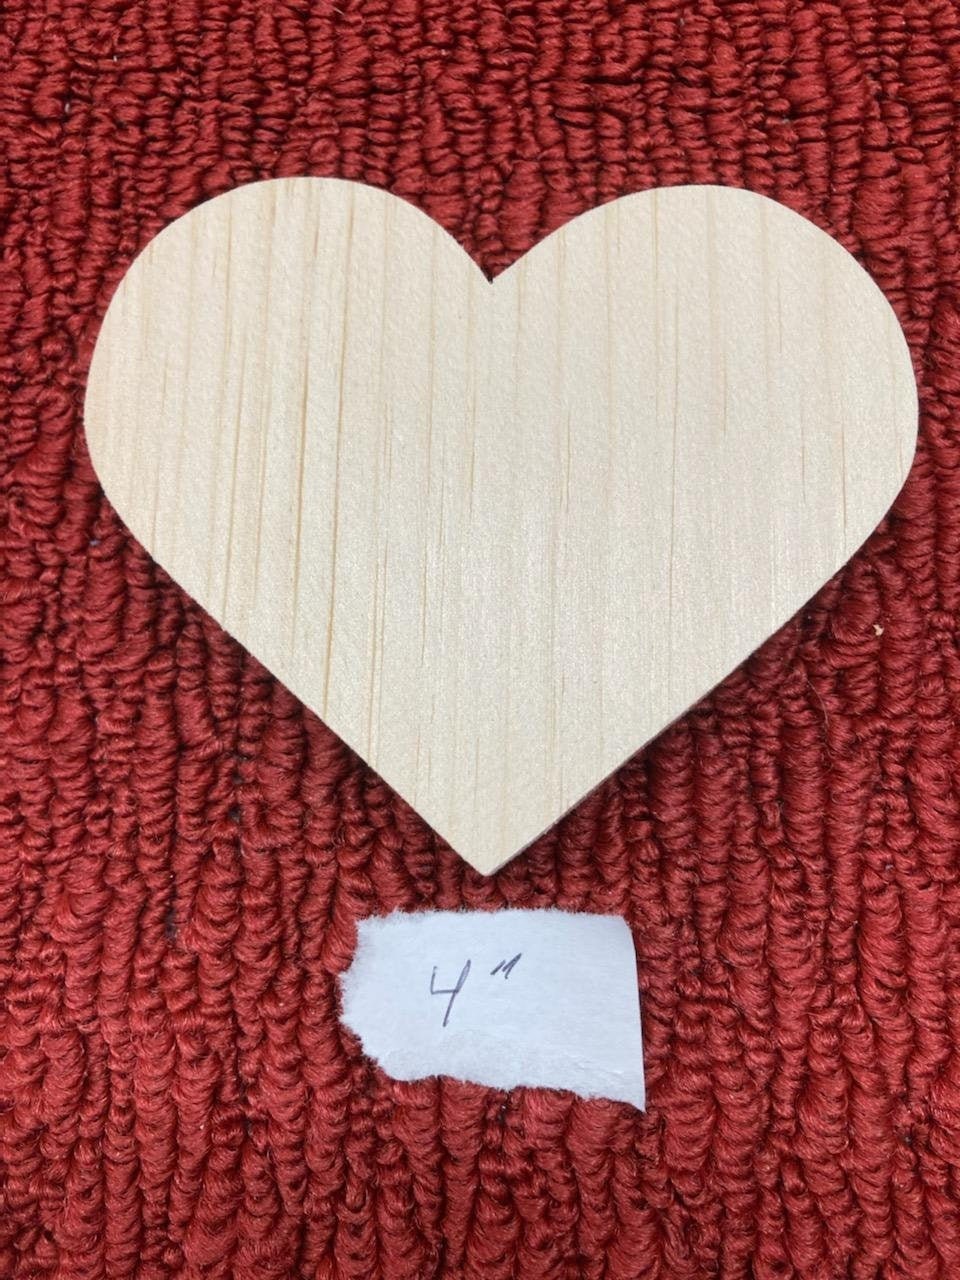 Small Wooden Hearts 1-1/2”, 1/4” Thick